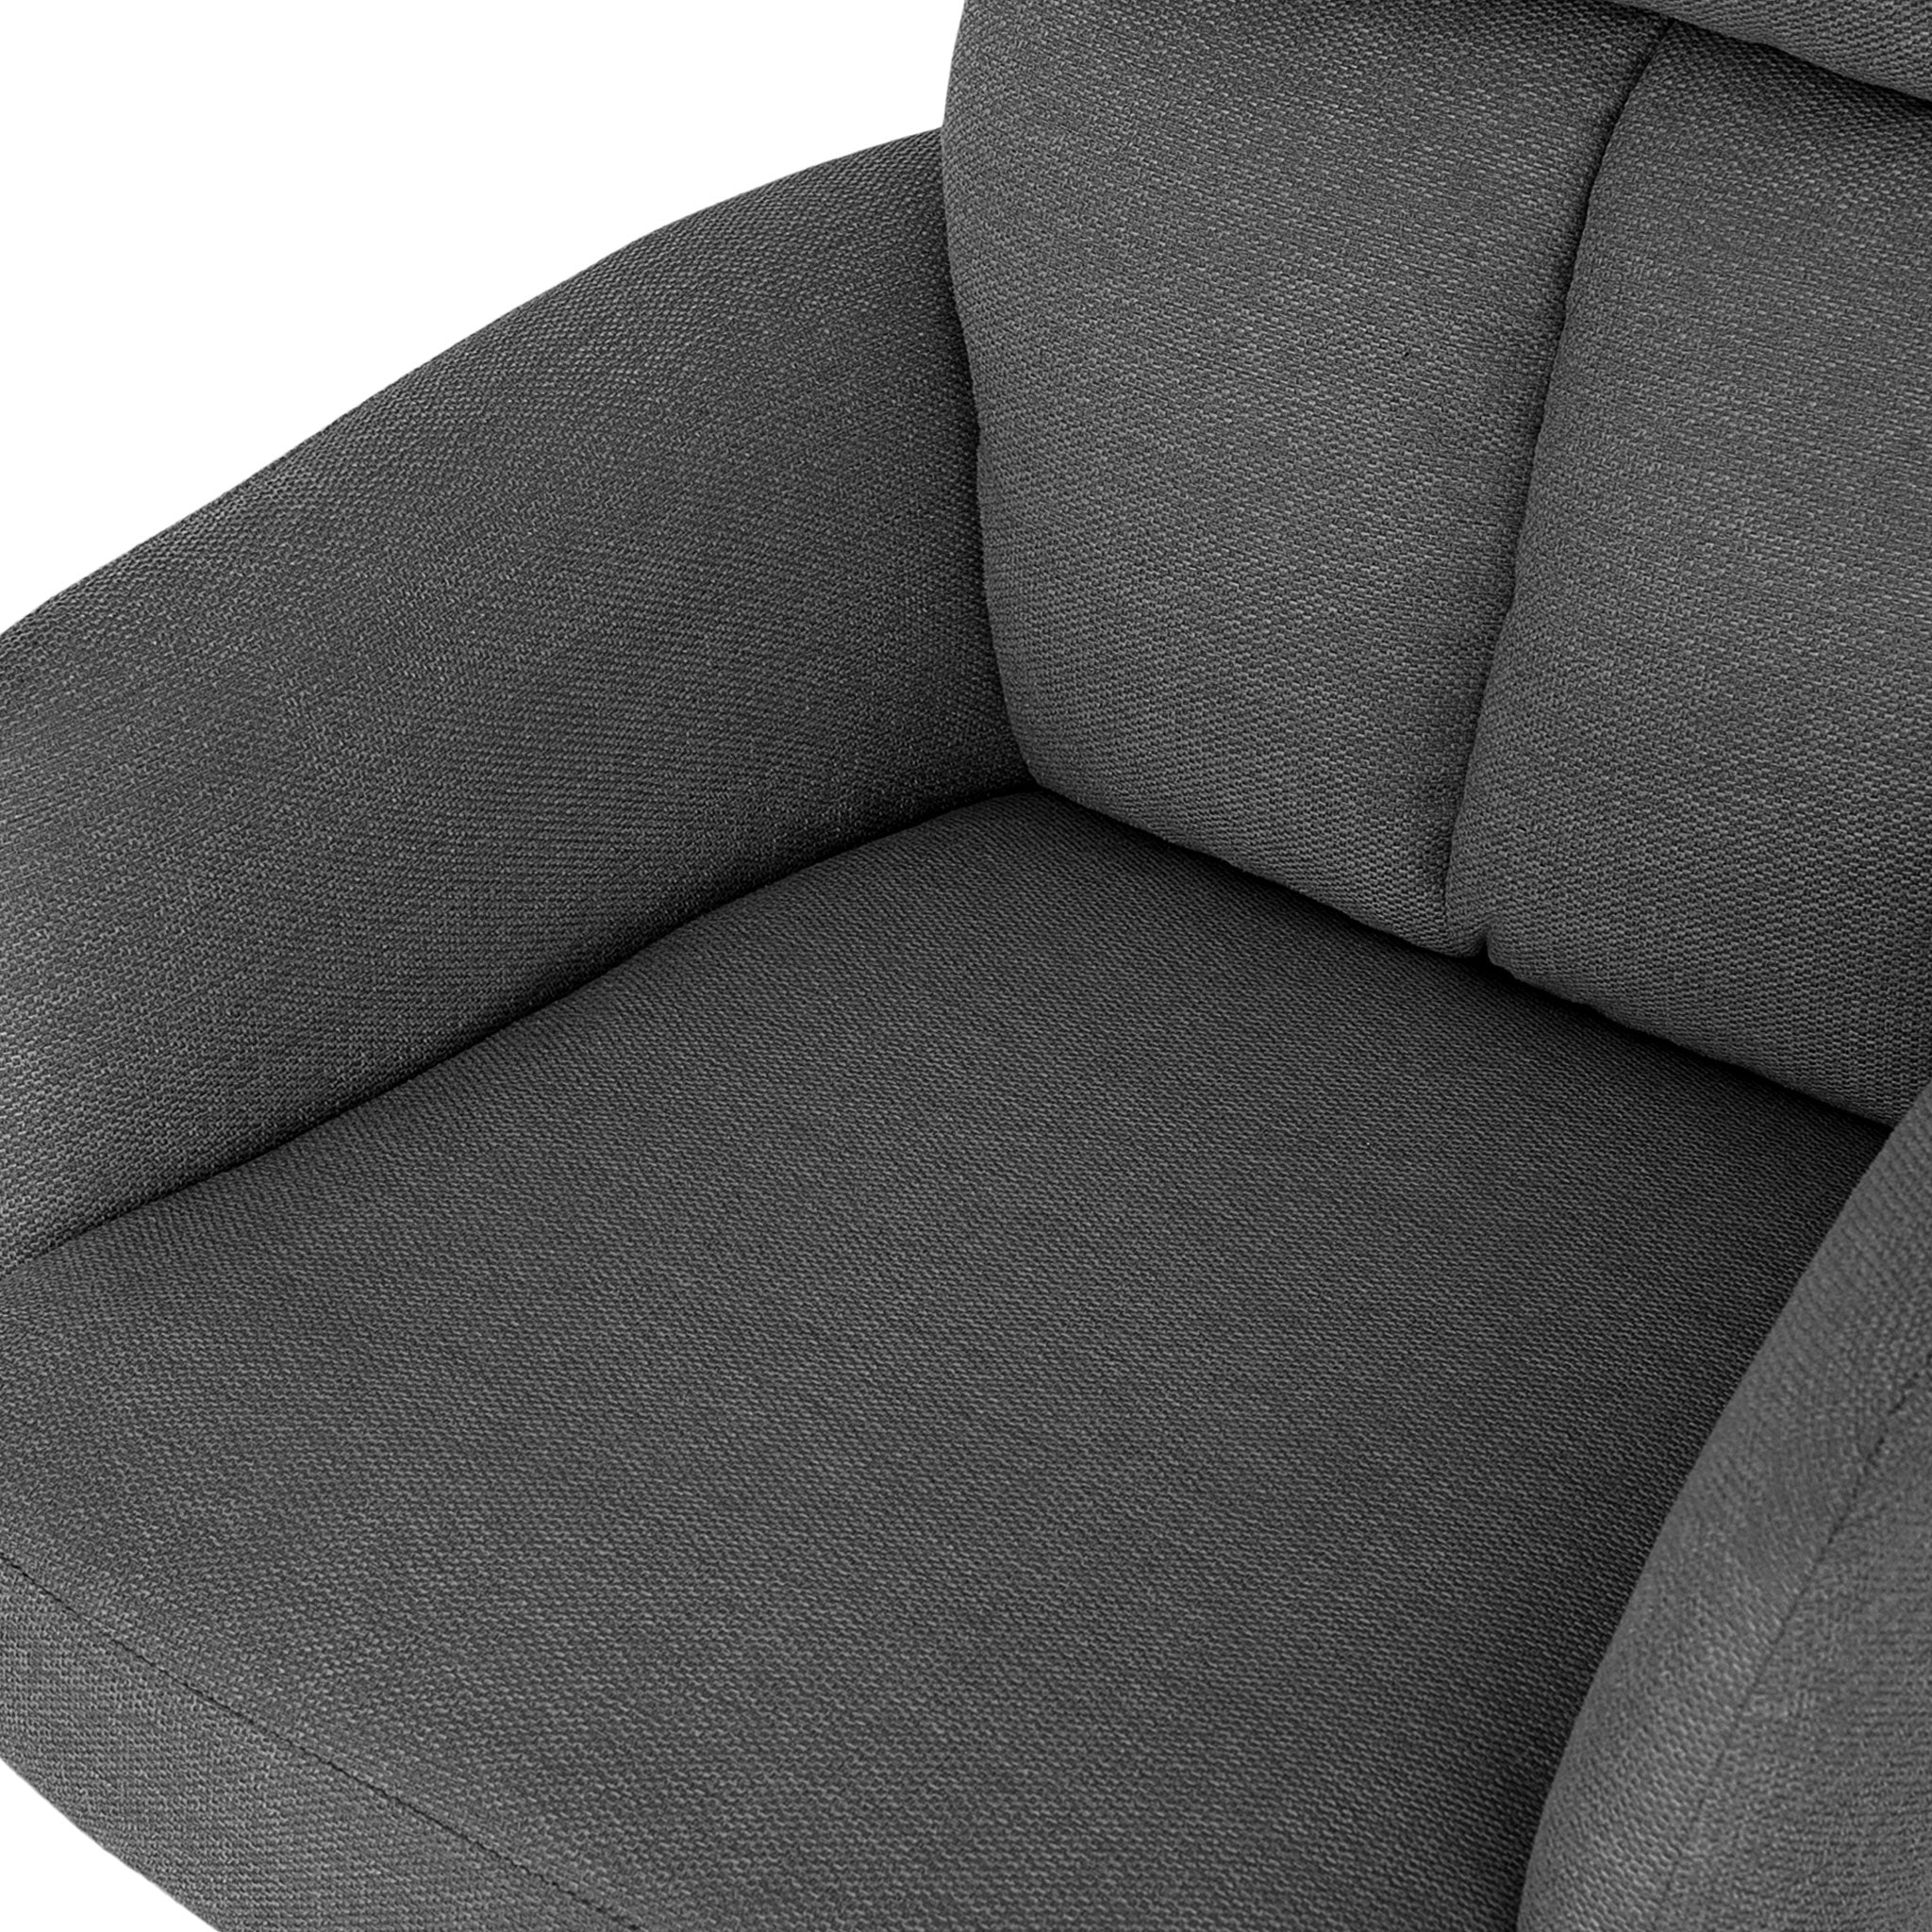 FONDHOUSE Ruvel Swivel Chair